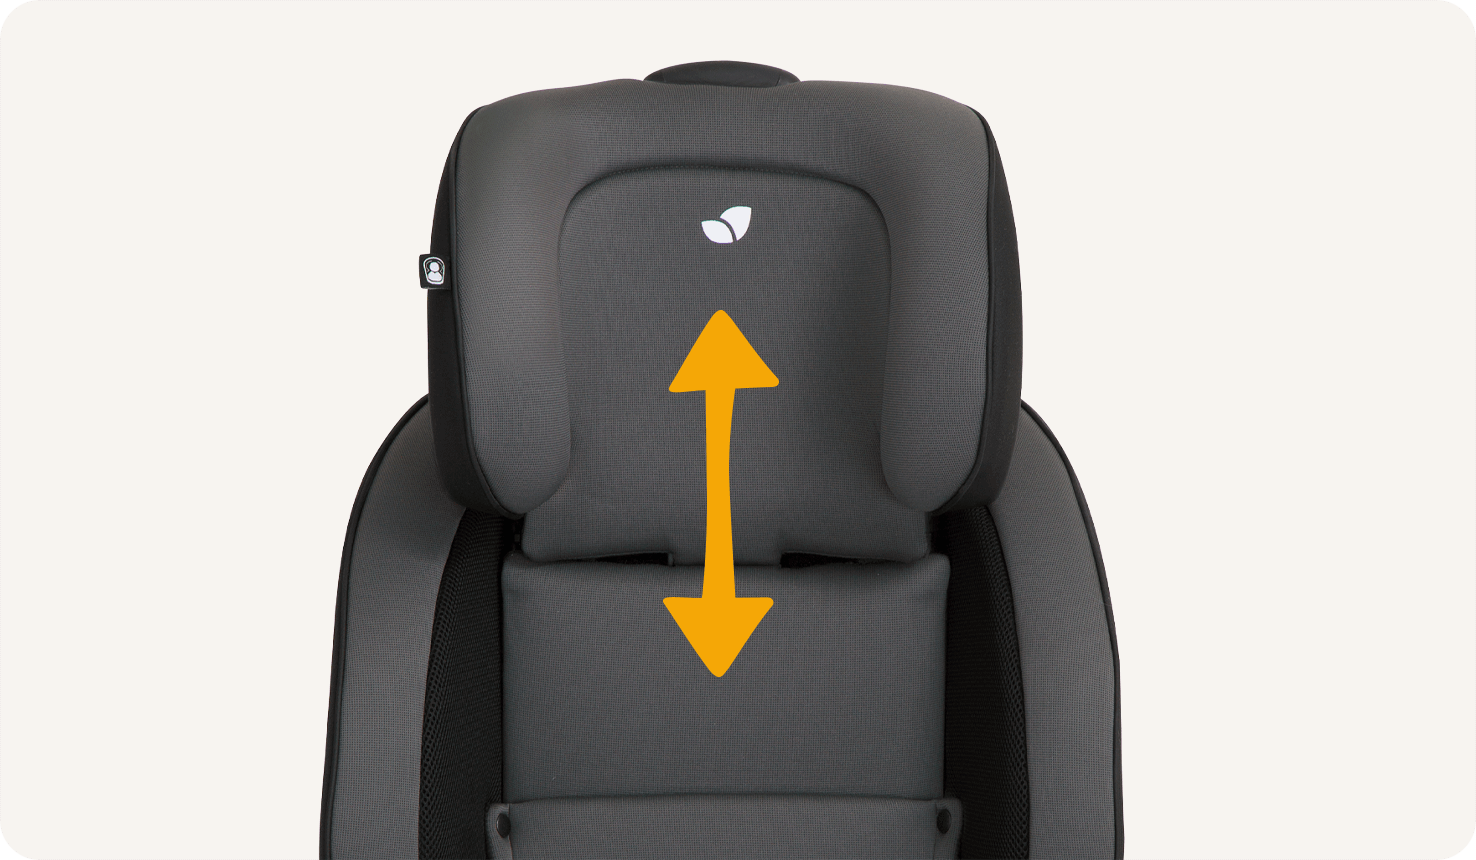 Closeup of the Joie Stages FX headrest fully raised with an orange double sided vertical arrow indicating the height adjustment